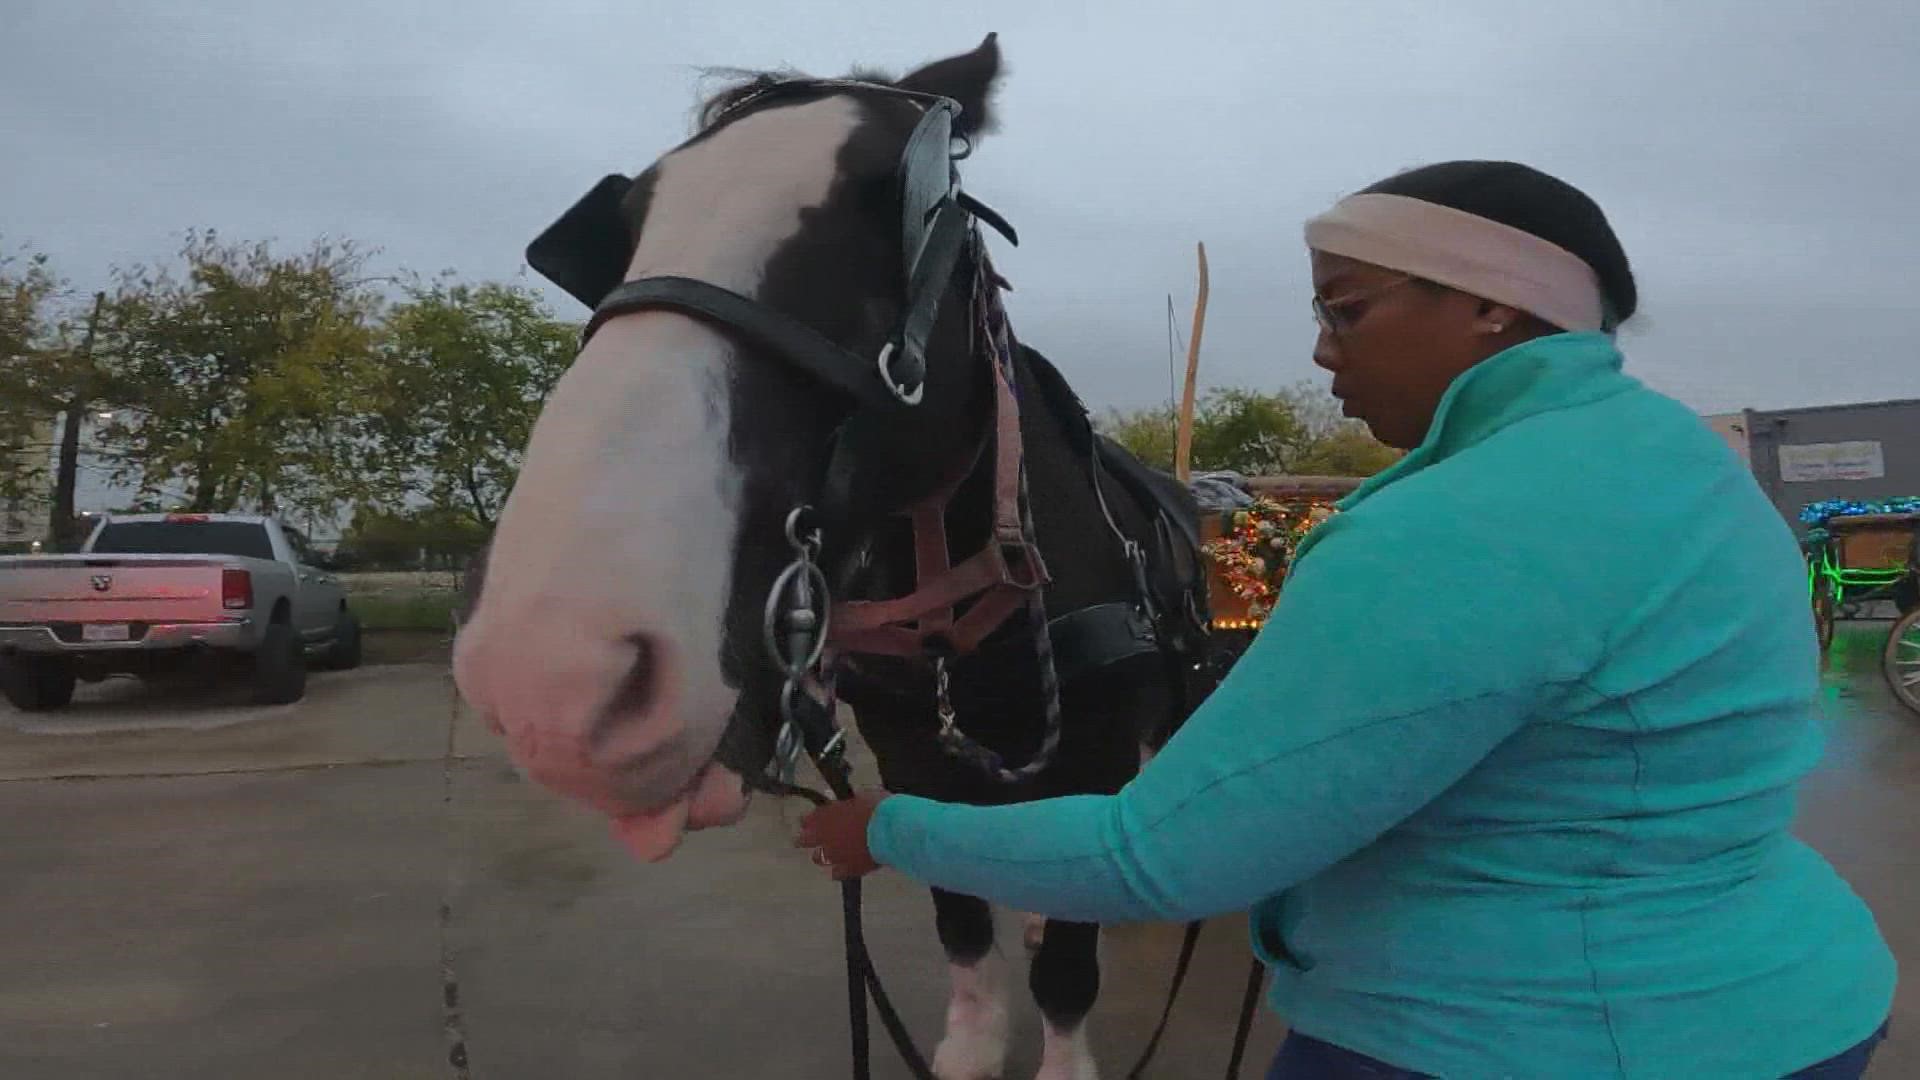 San Antonio considering banning horse-drawn carriages 